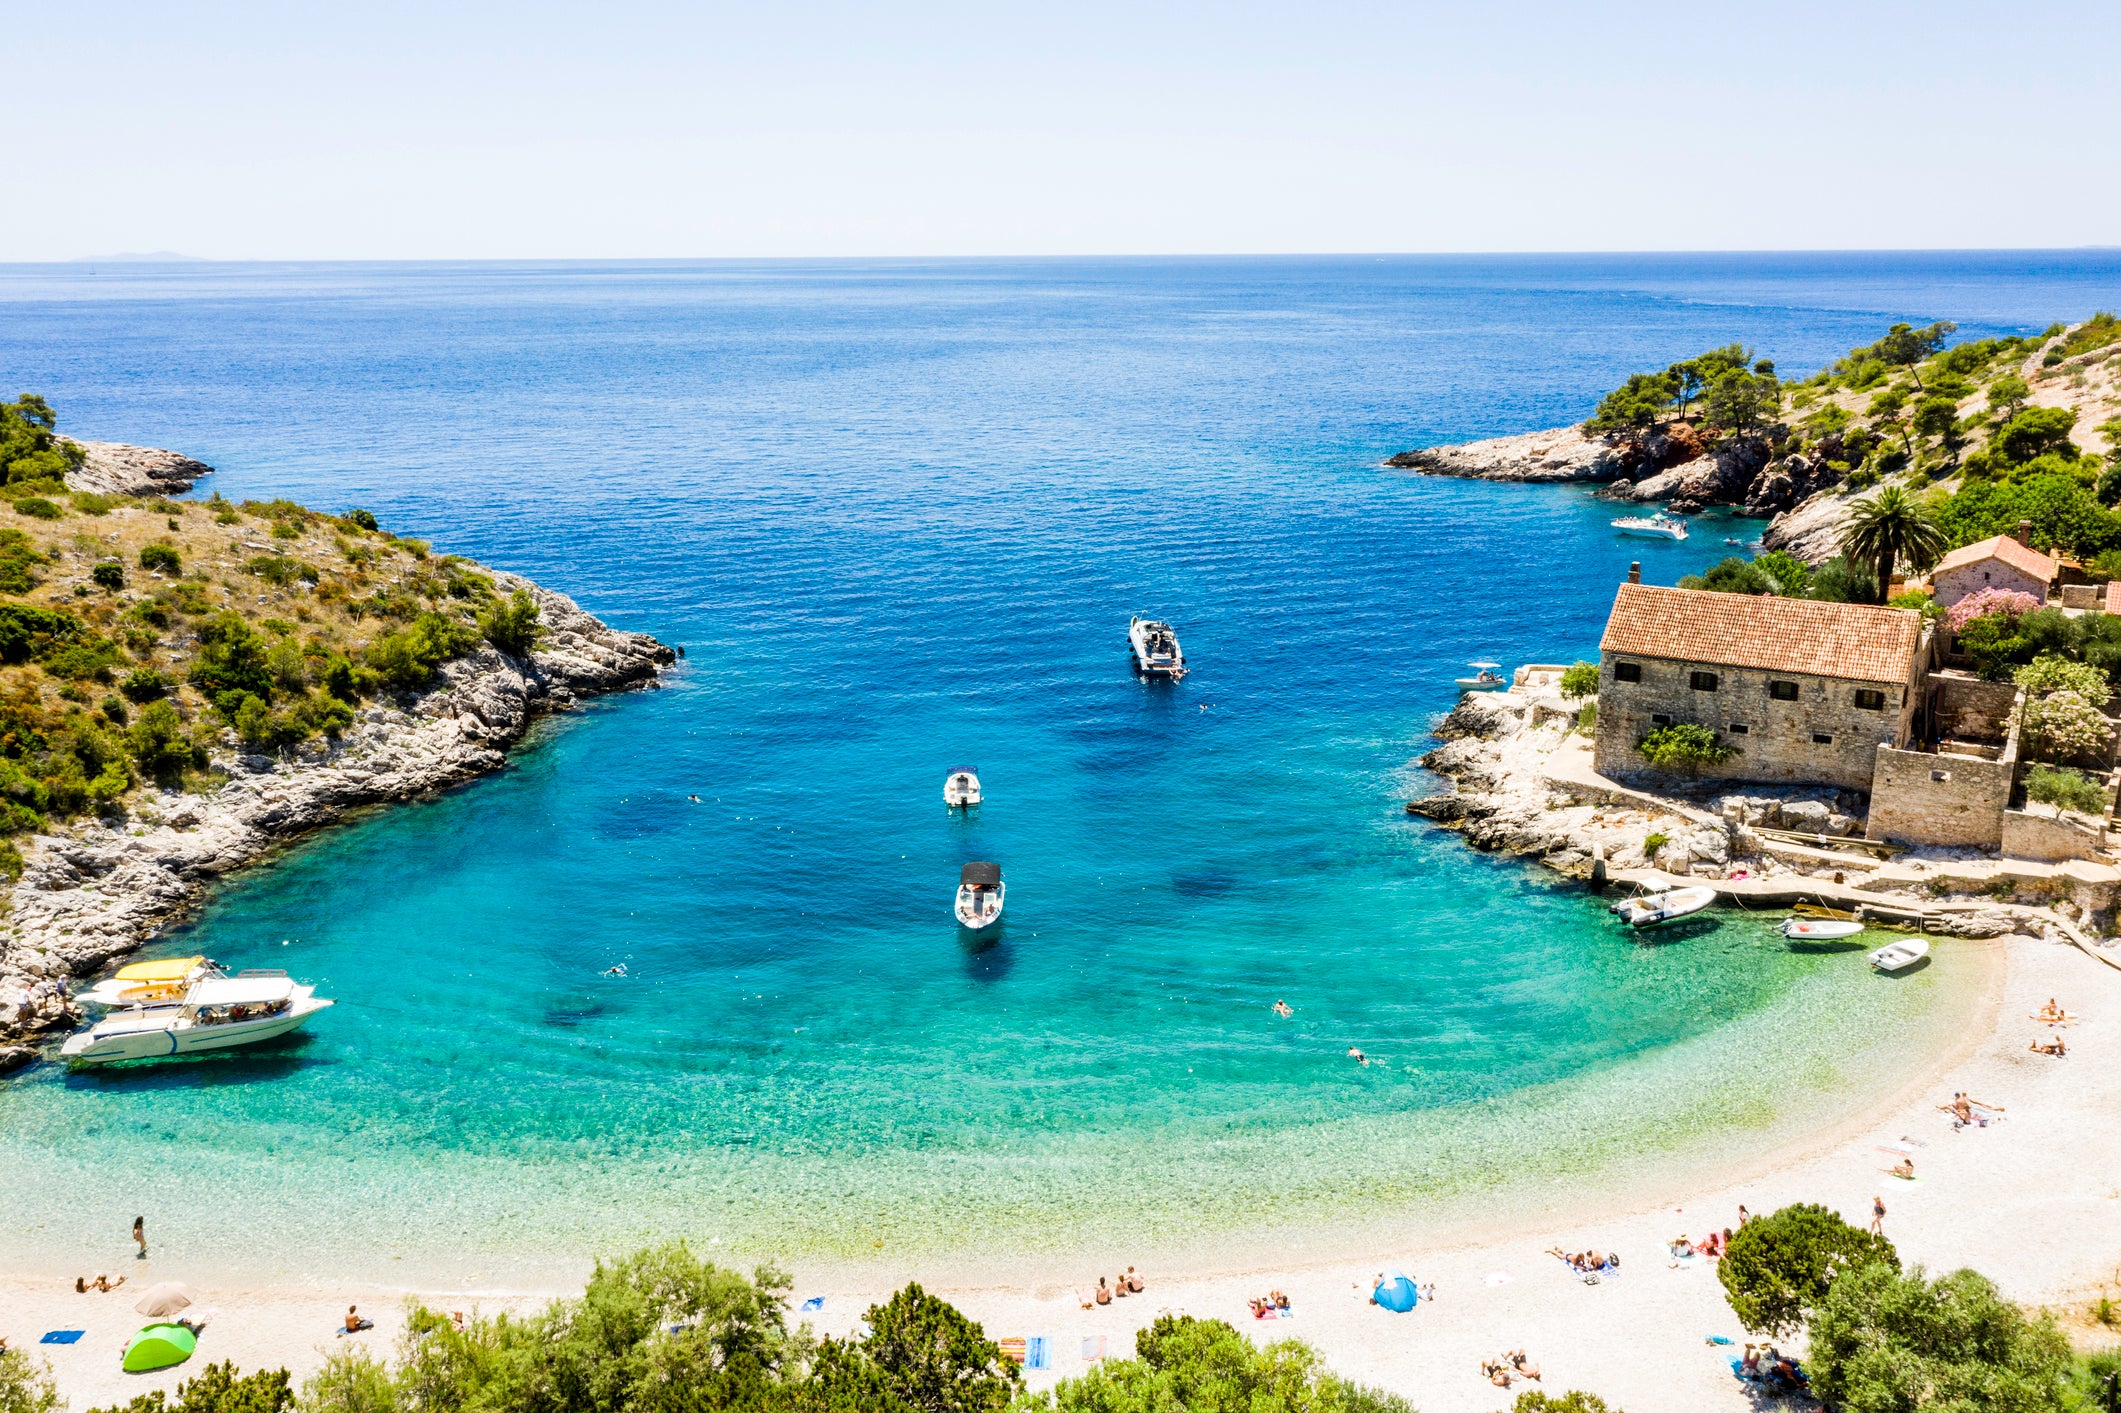 It’s time to start thinking about a beach getaway to somewhere like Croatia